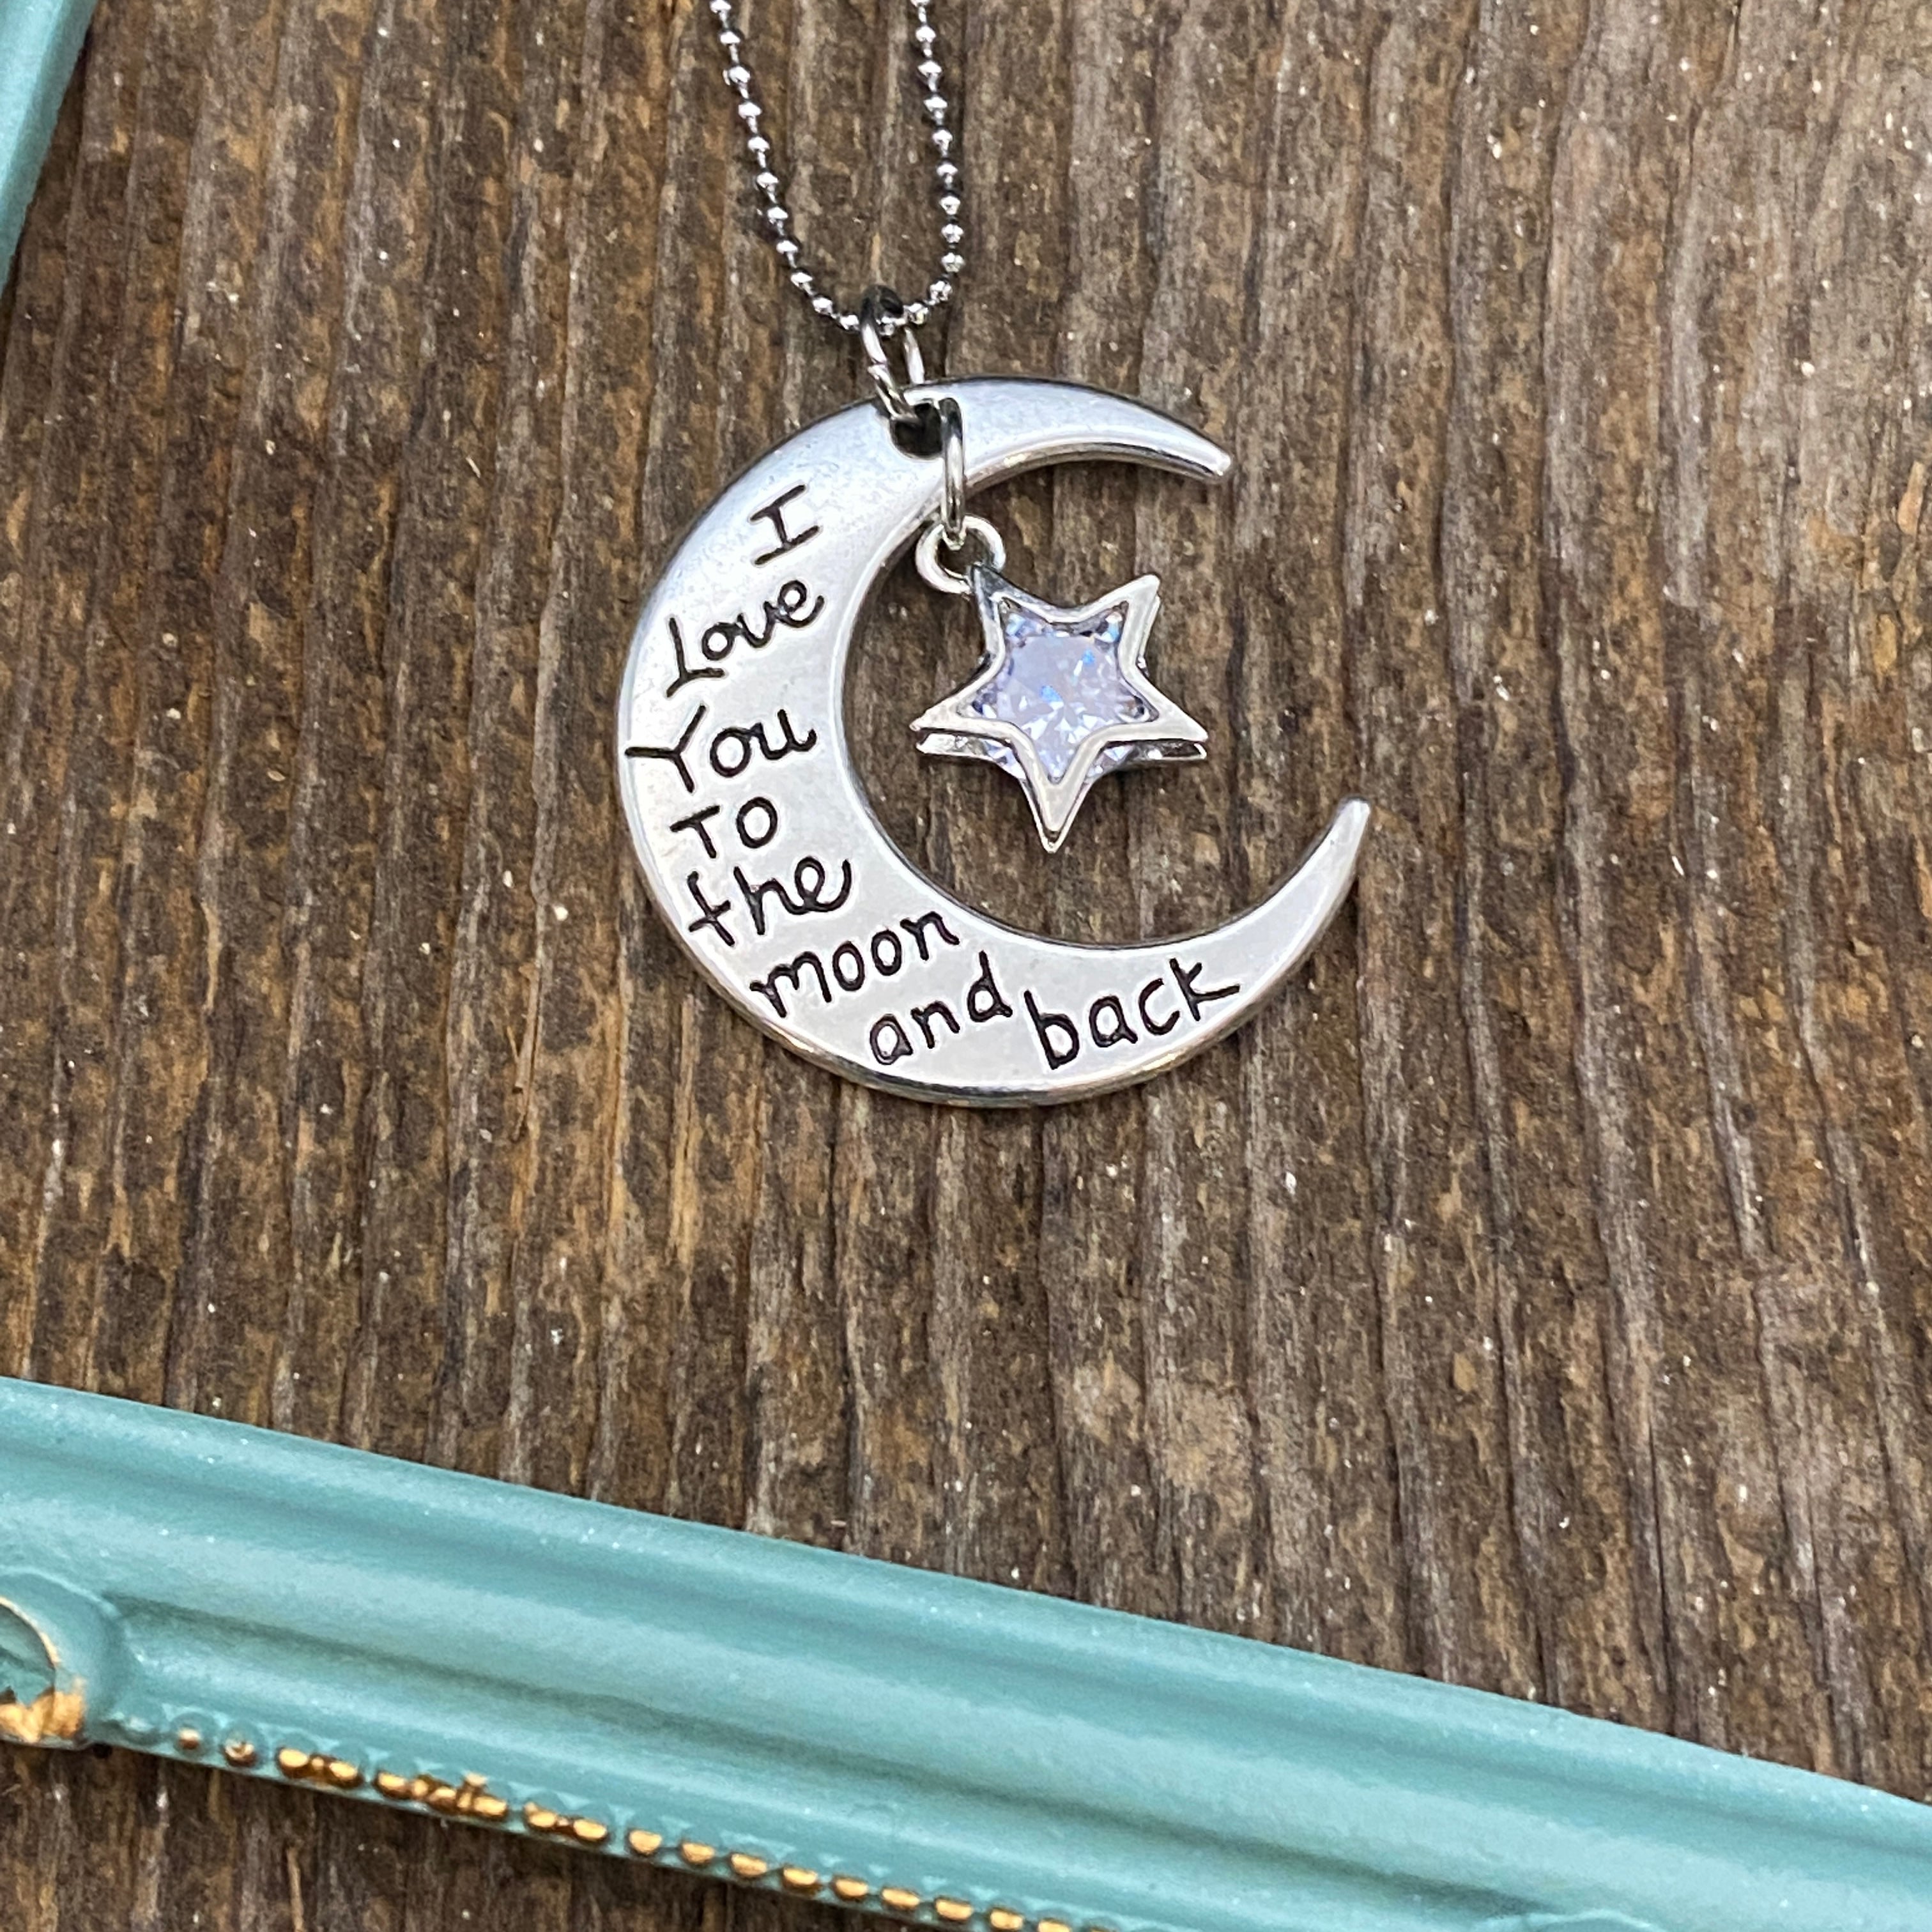 Love you to the moon and back” necklace – Jacob Raymond Jewelry